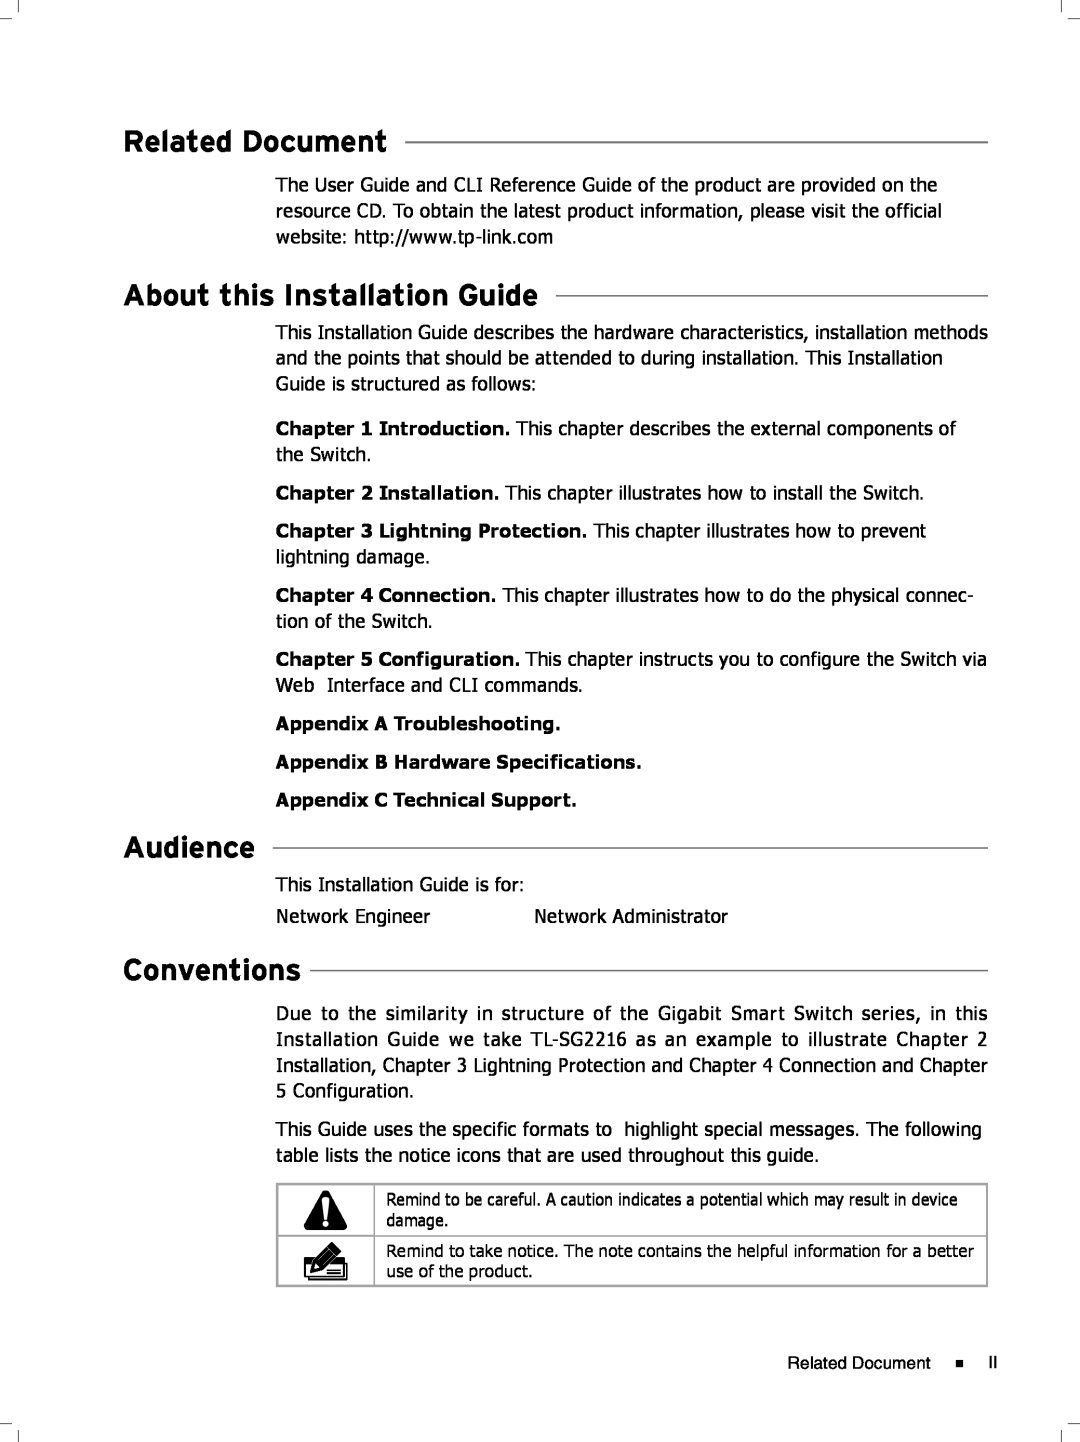 TP-Link TL-SG2216 Related Document, About this Installation Guide, Audience, Conventions, Appendix C Technical Support 